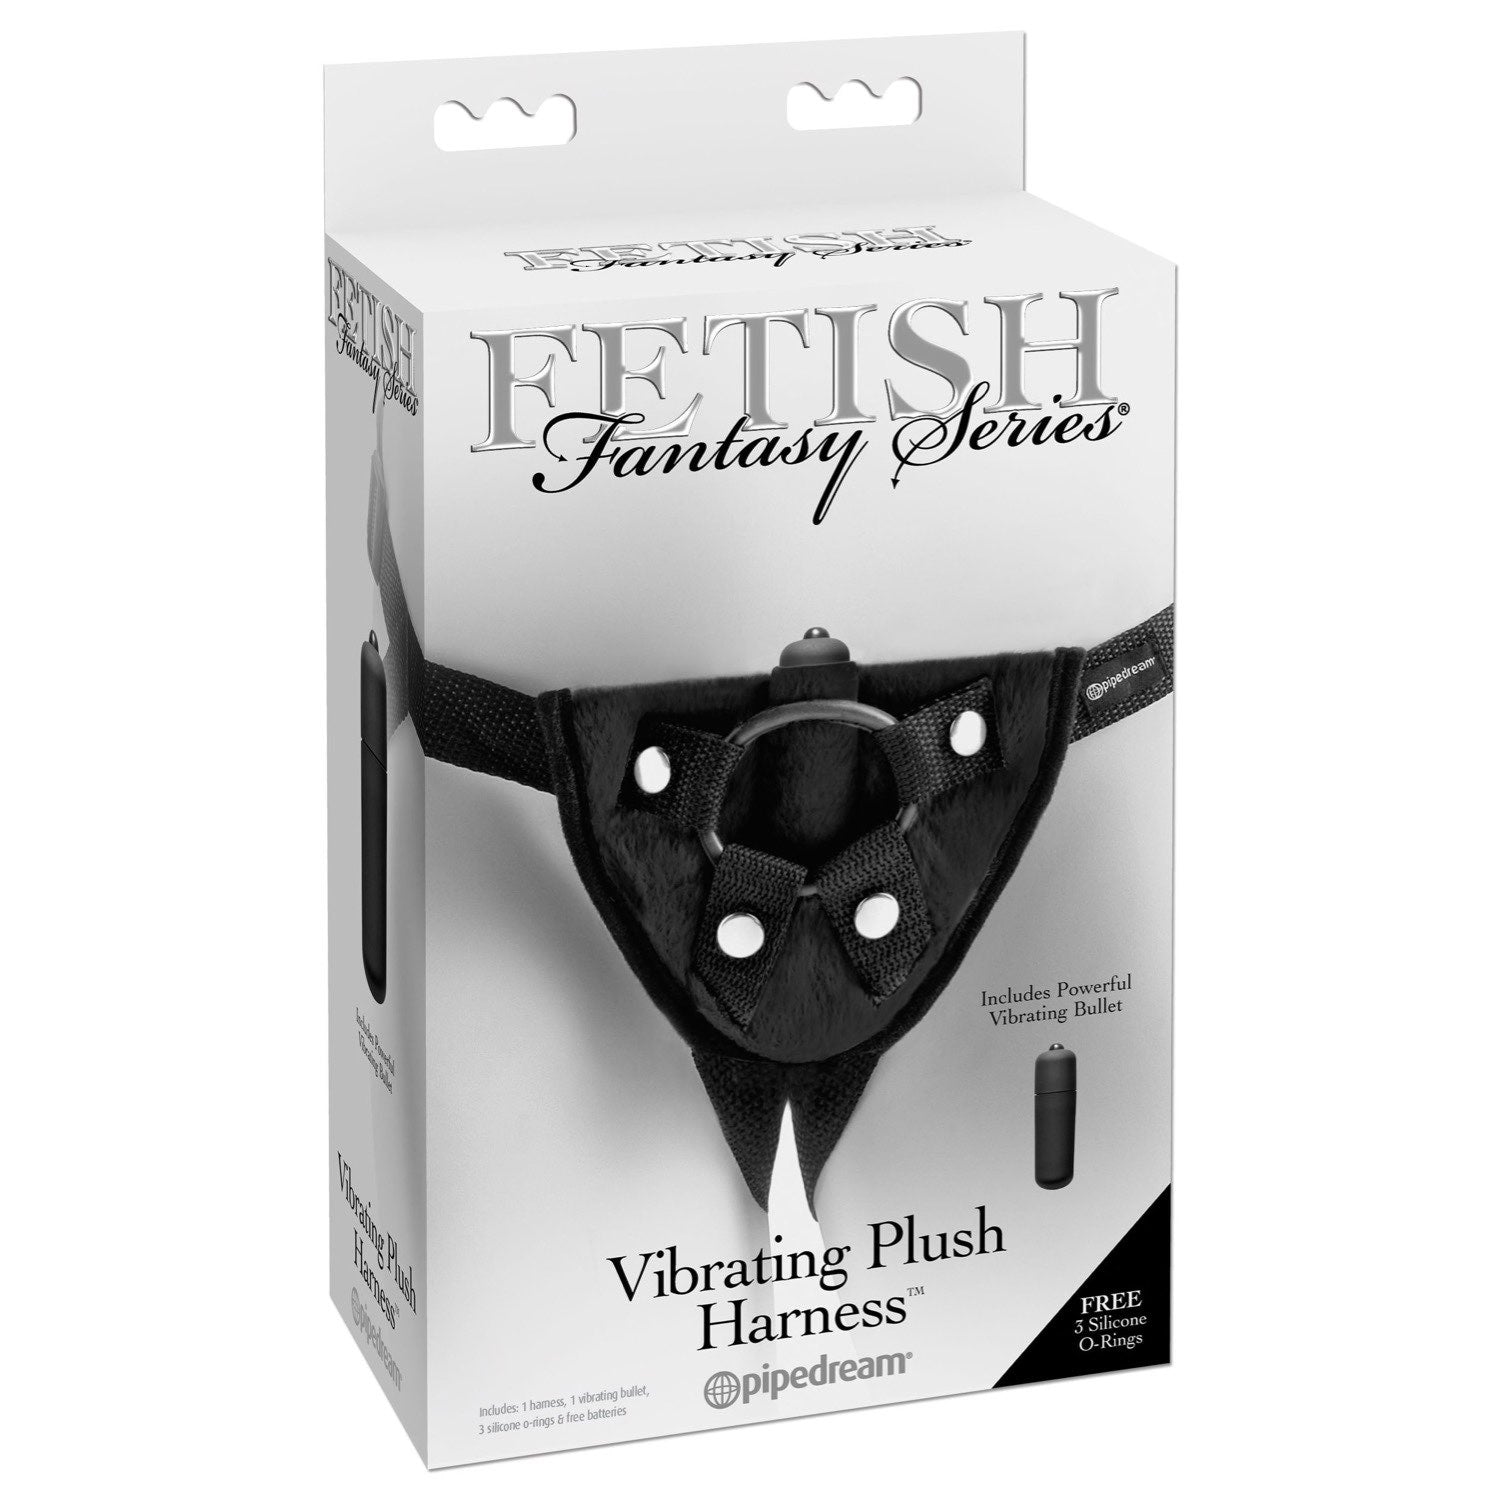 Fetish Fantasy Series Vibrating Plush Harness - Black Vibrating Strap-On Harness (No Probe Included) by Pipedream